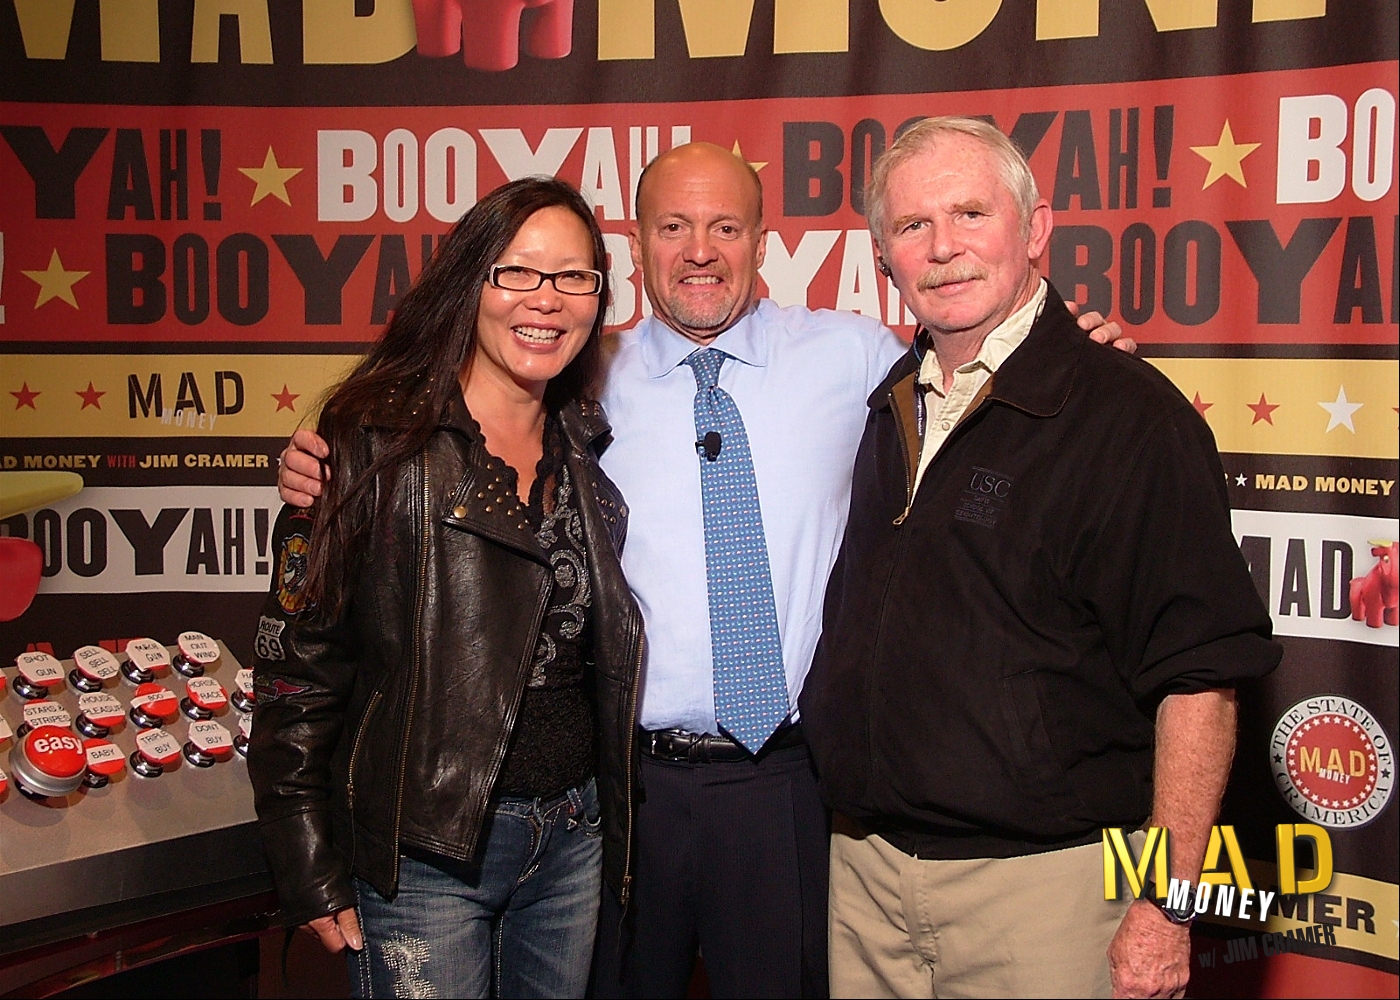 Joyce Chow, Jim Cramer and William Hoehne Jr. at The Cable Show 2010 party at Universal Studios,Universal City, CA